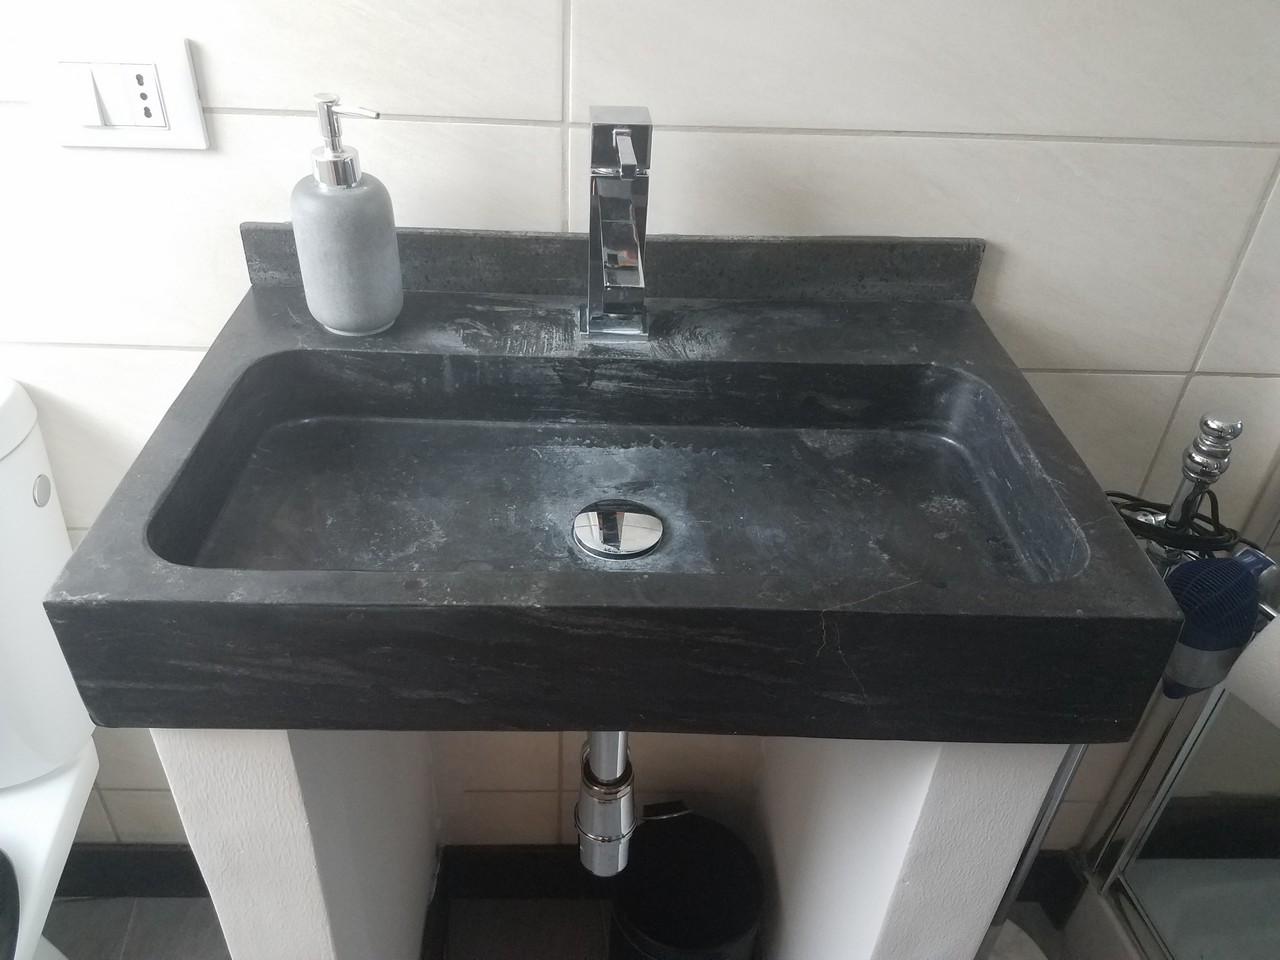 a sink with a soap dispenser